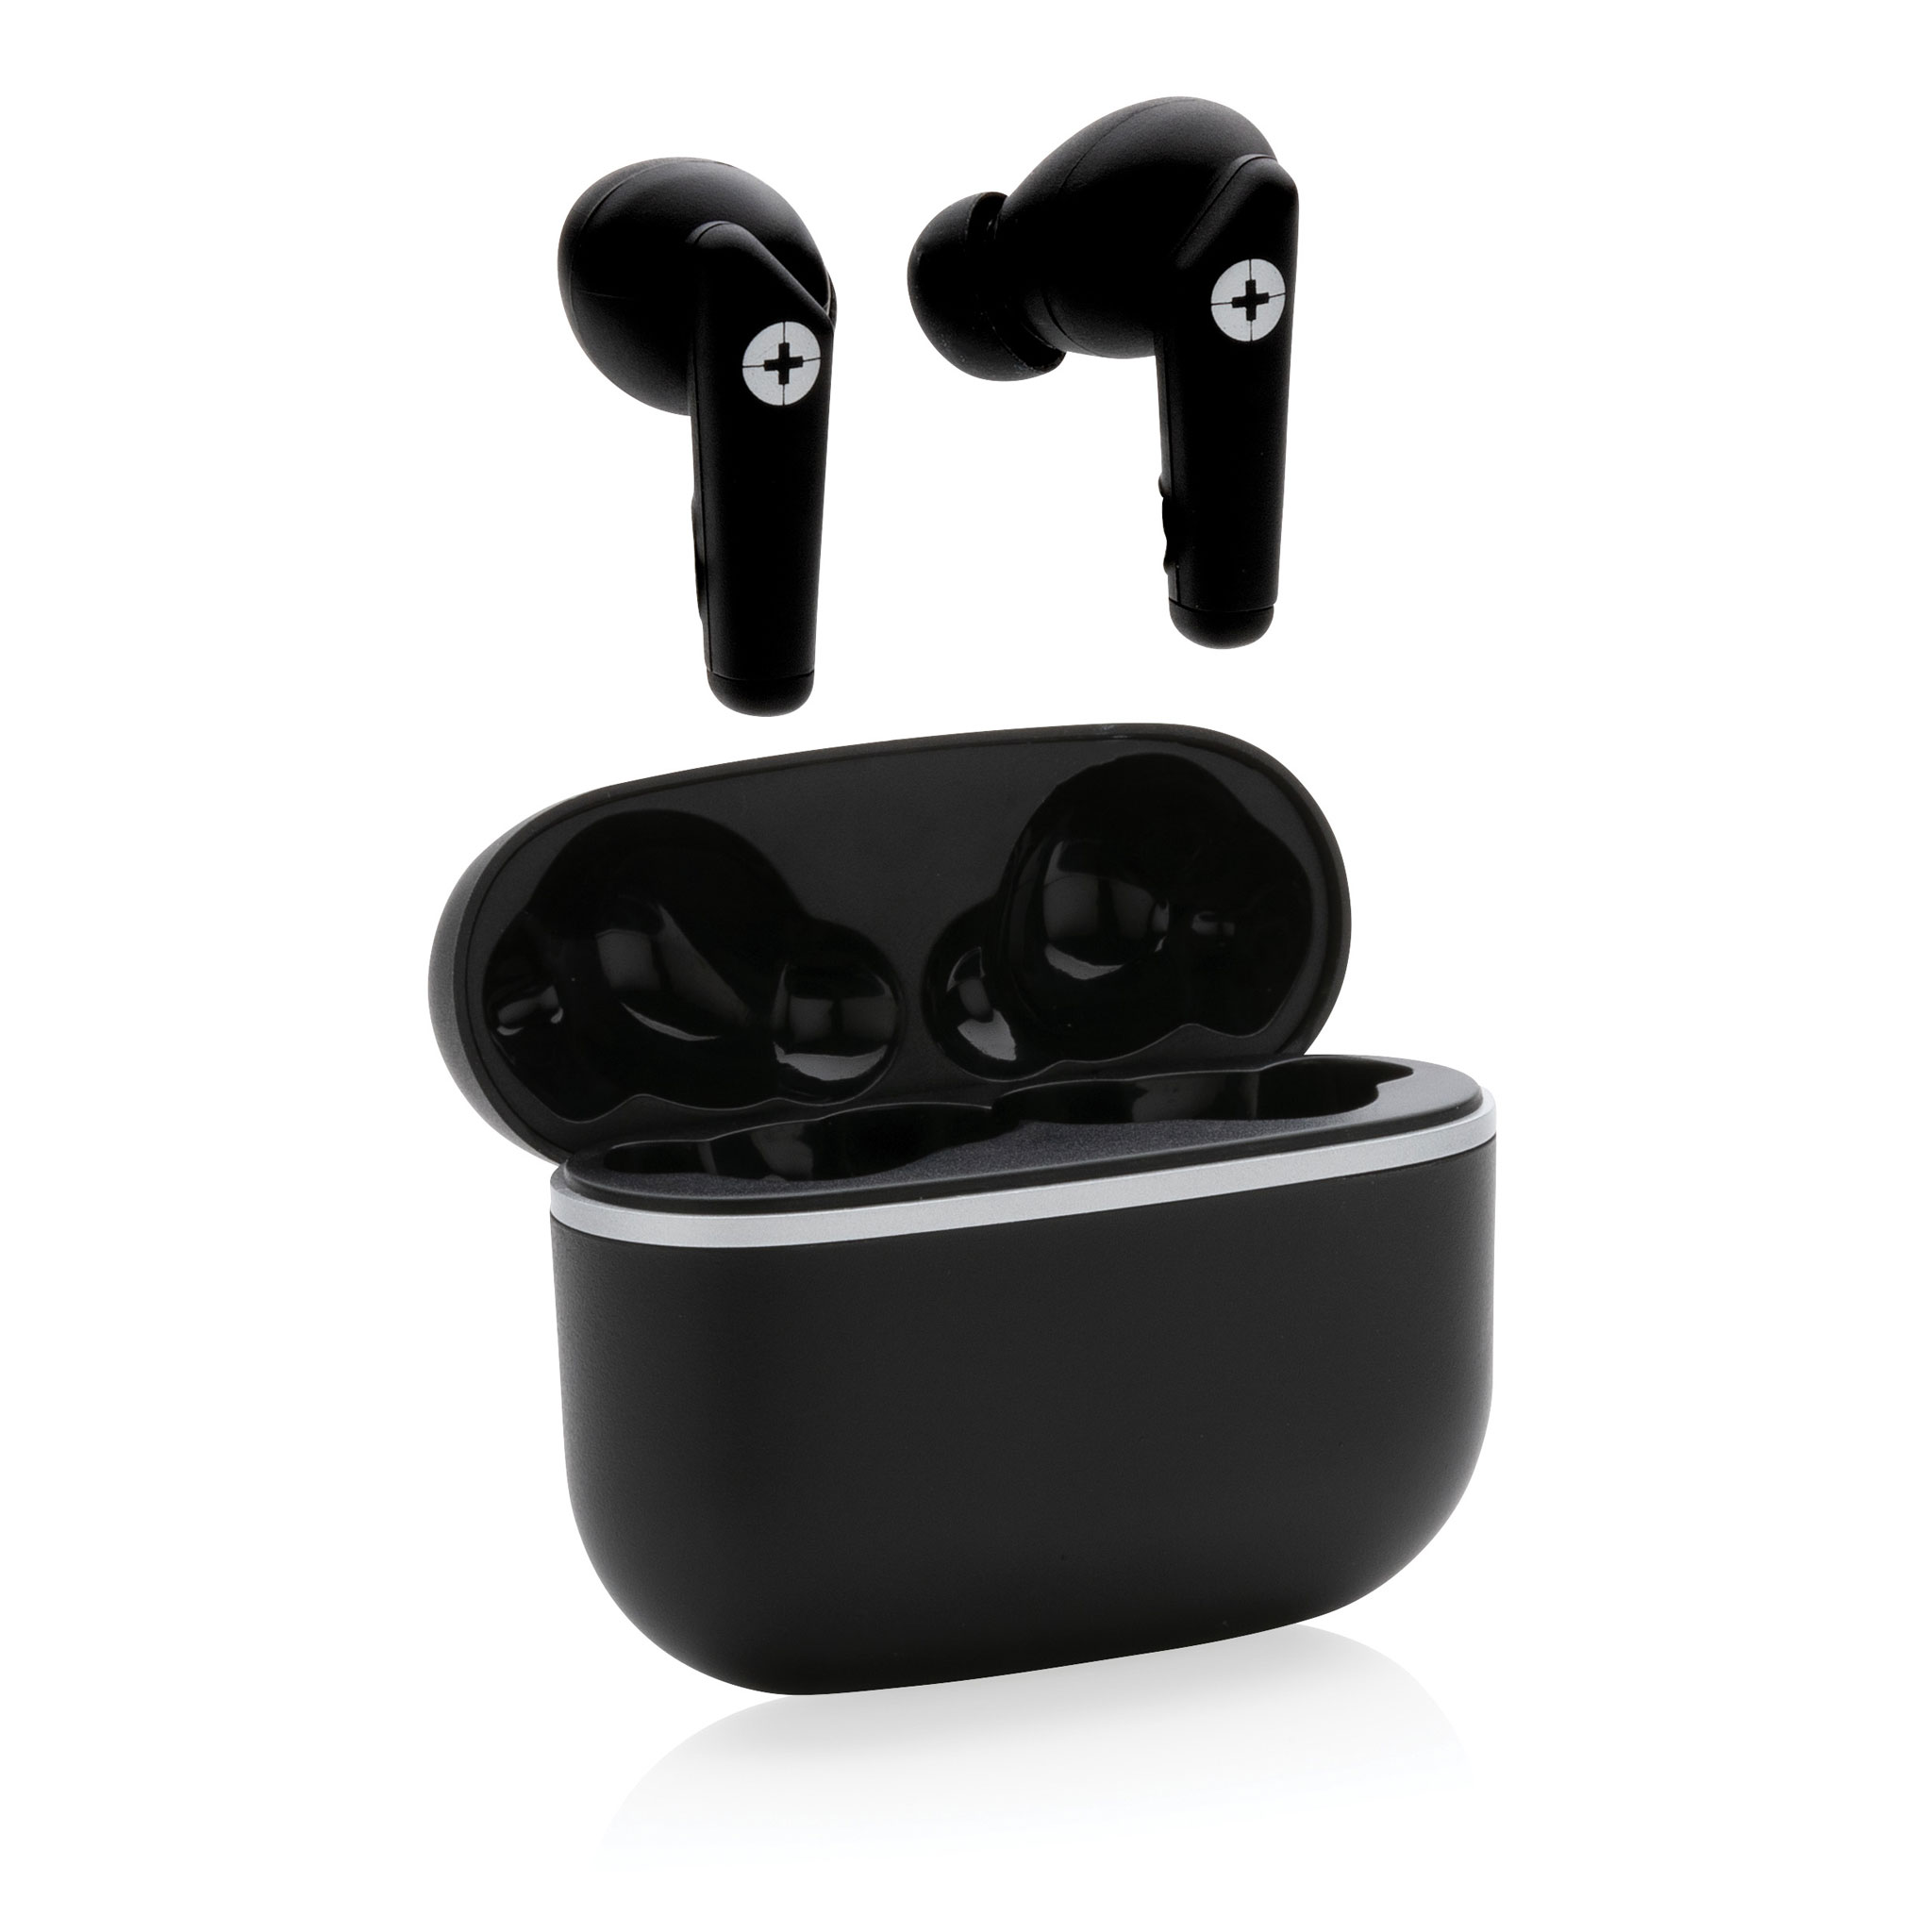 New generation true wireless earbuds made with RCS (Recycled Claim Standard) certified recycled ABS.